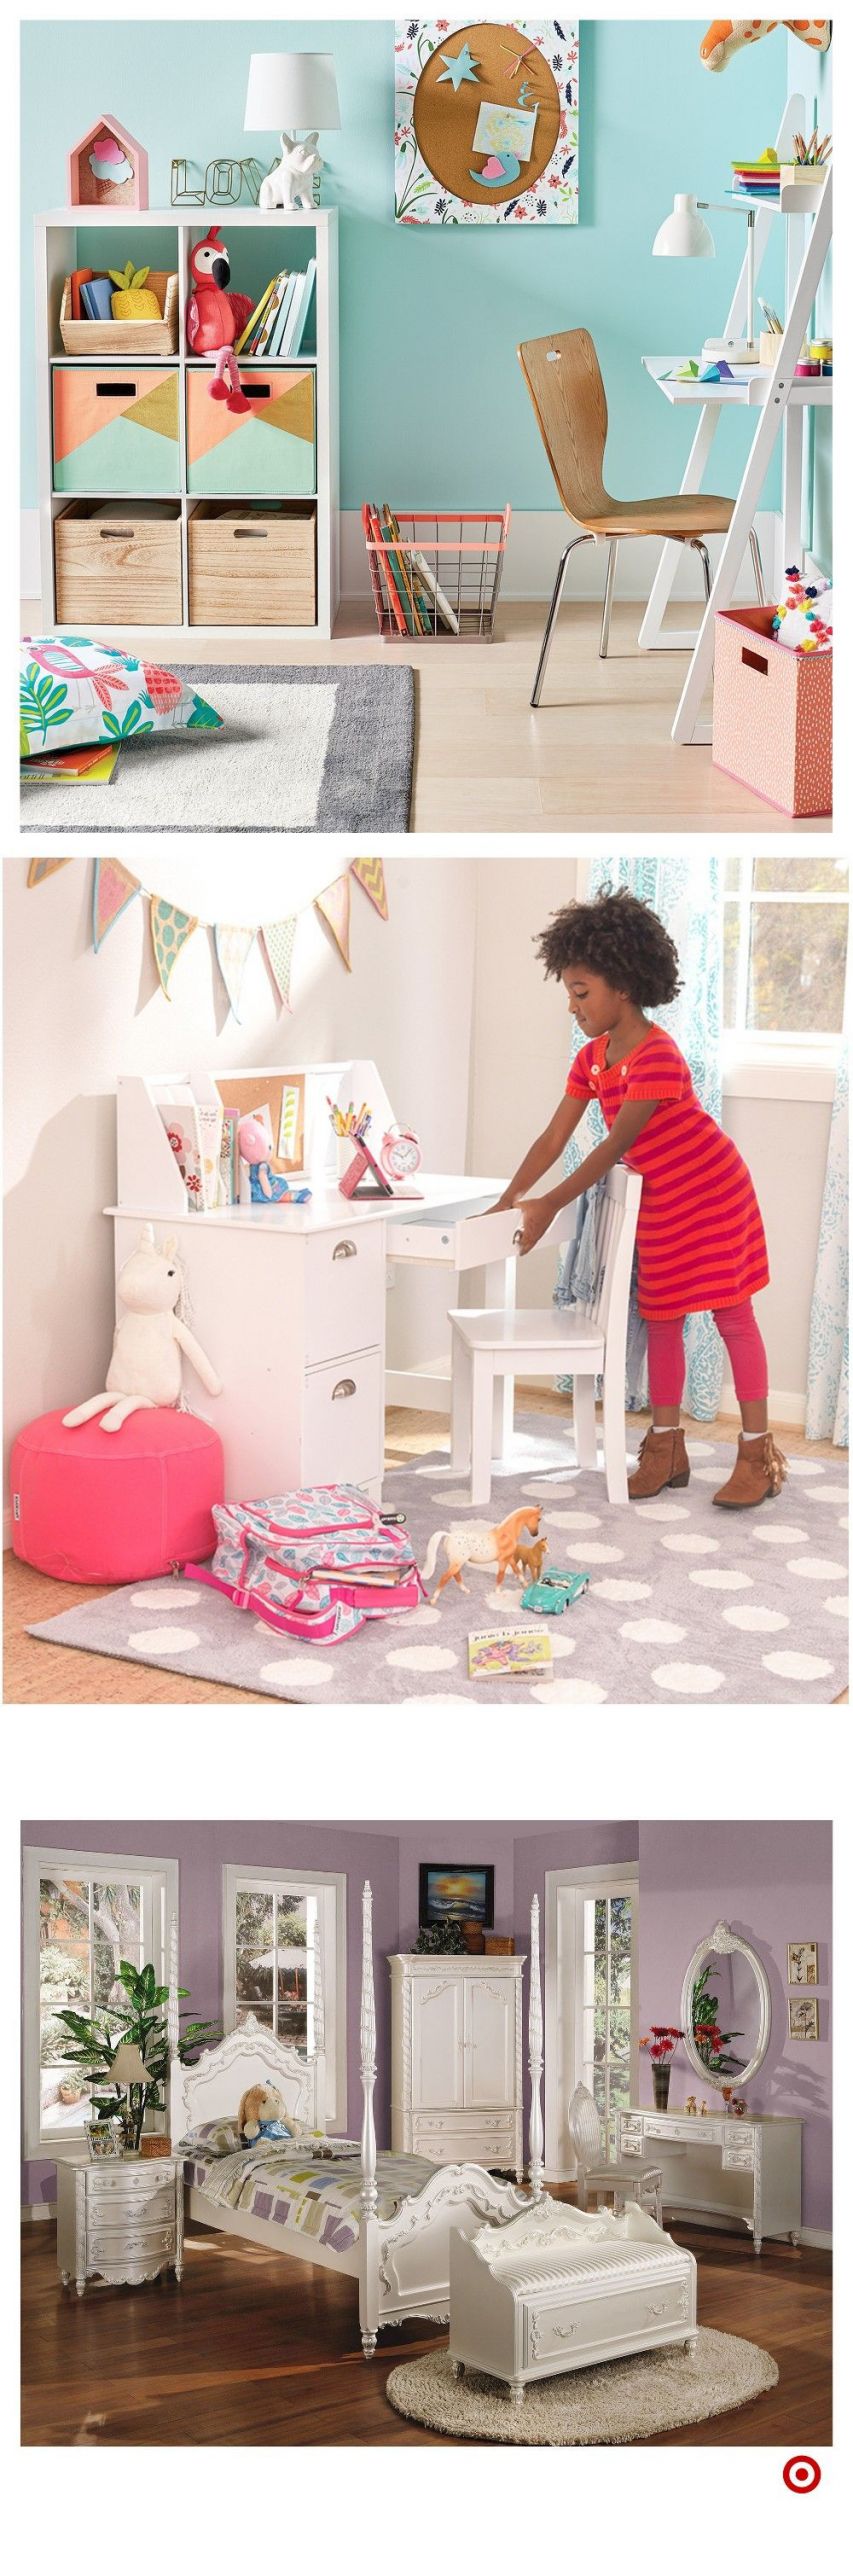 Target Kids Room Decor
 Shop Tar for kids desk you will love at great low